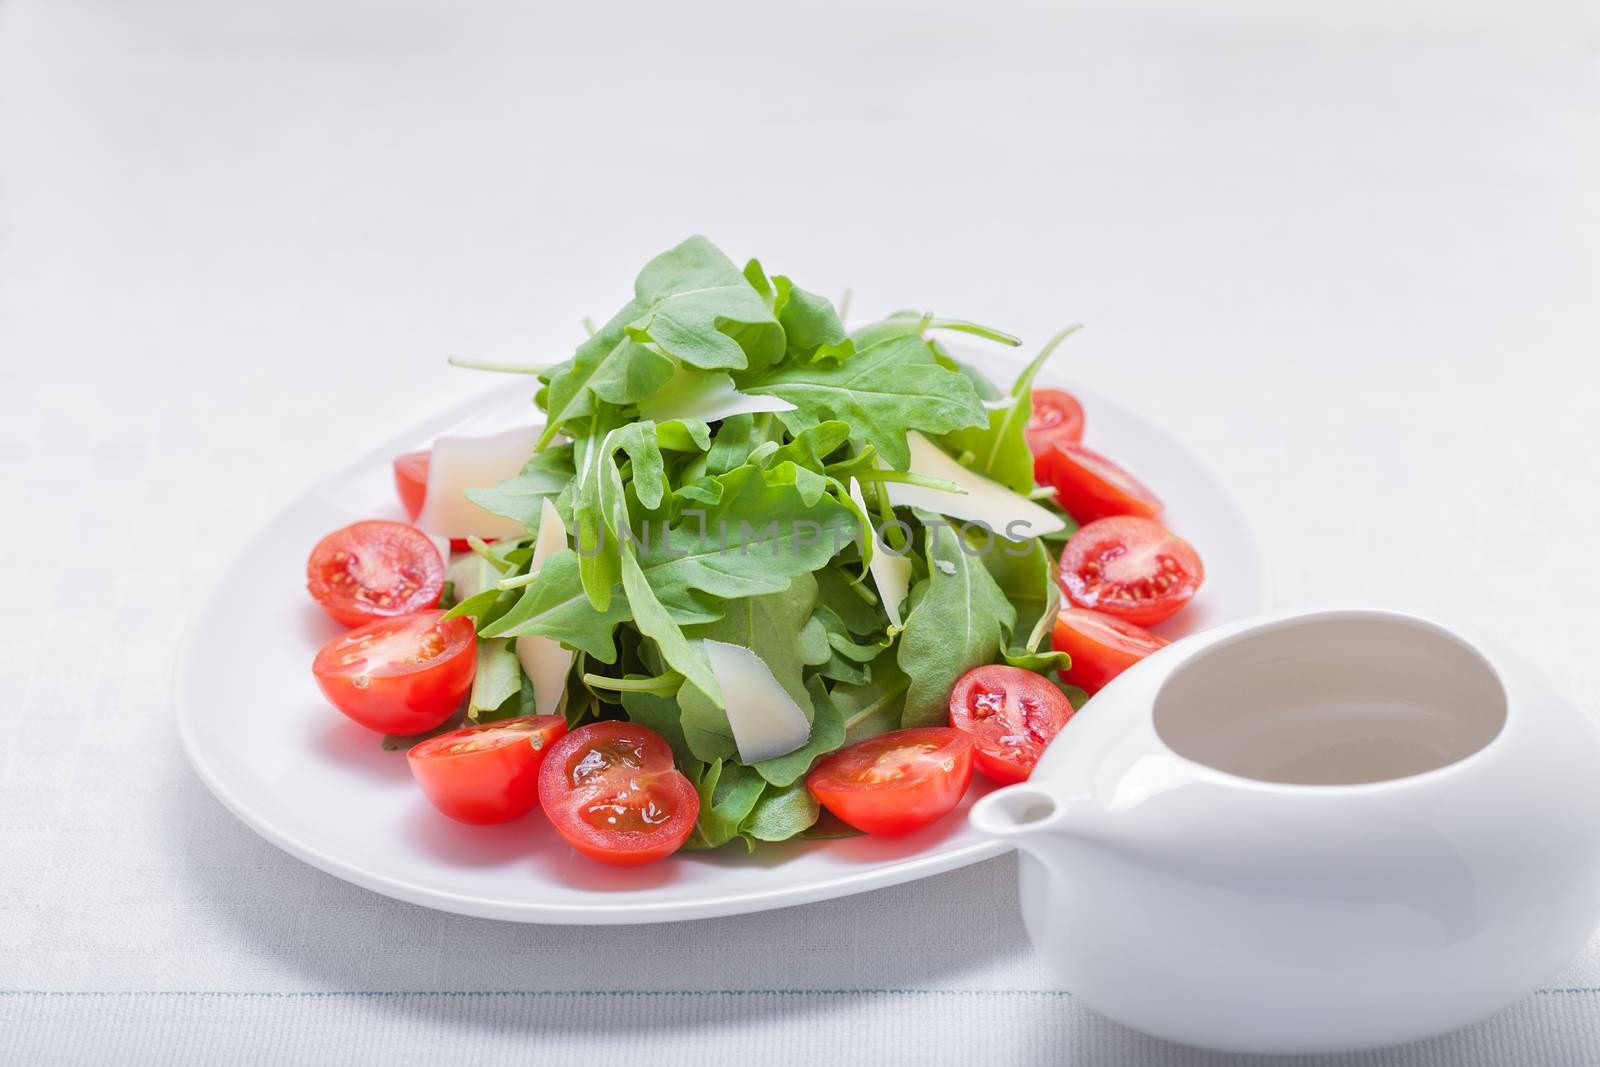 Salad with arugula, tomatoes and greenery on a plate